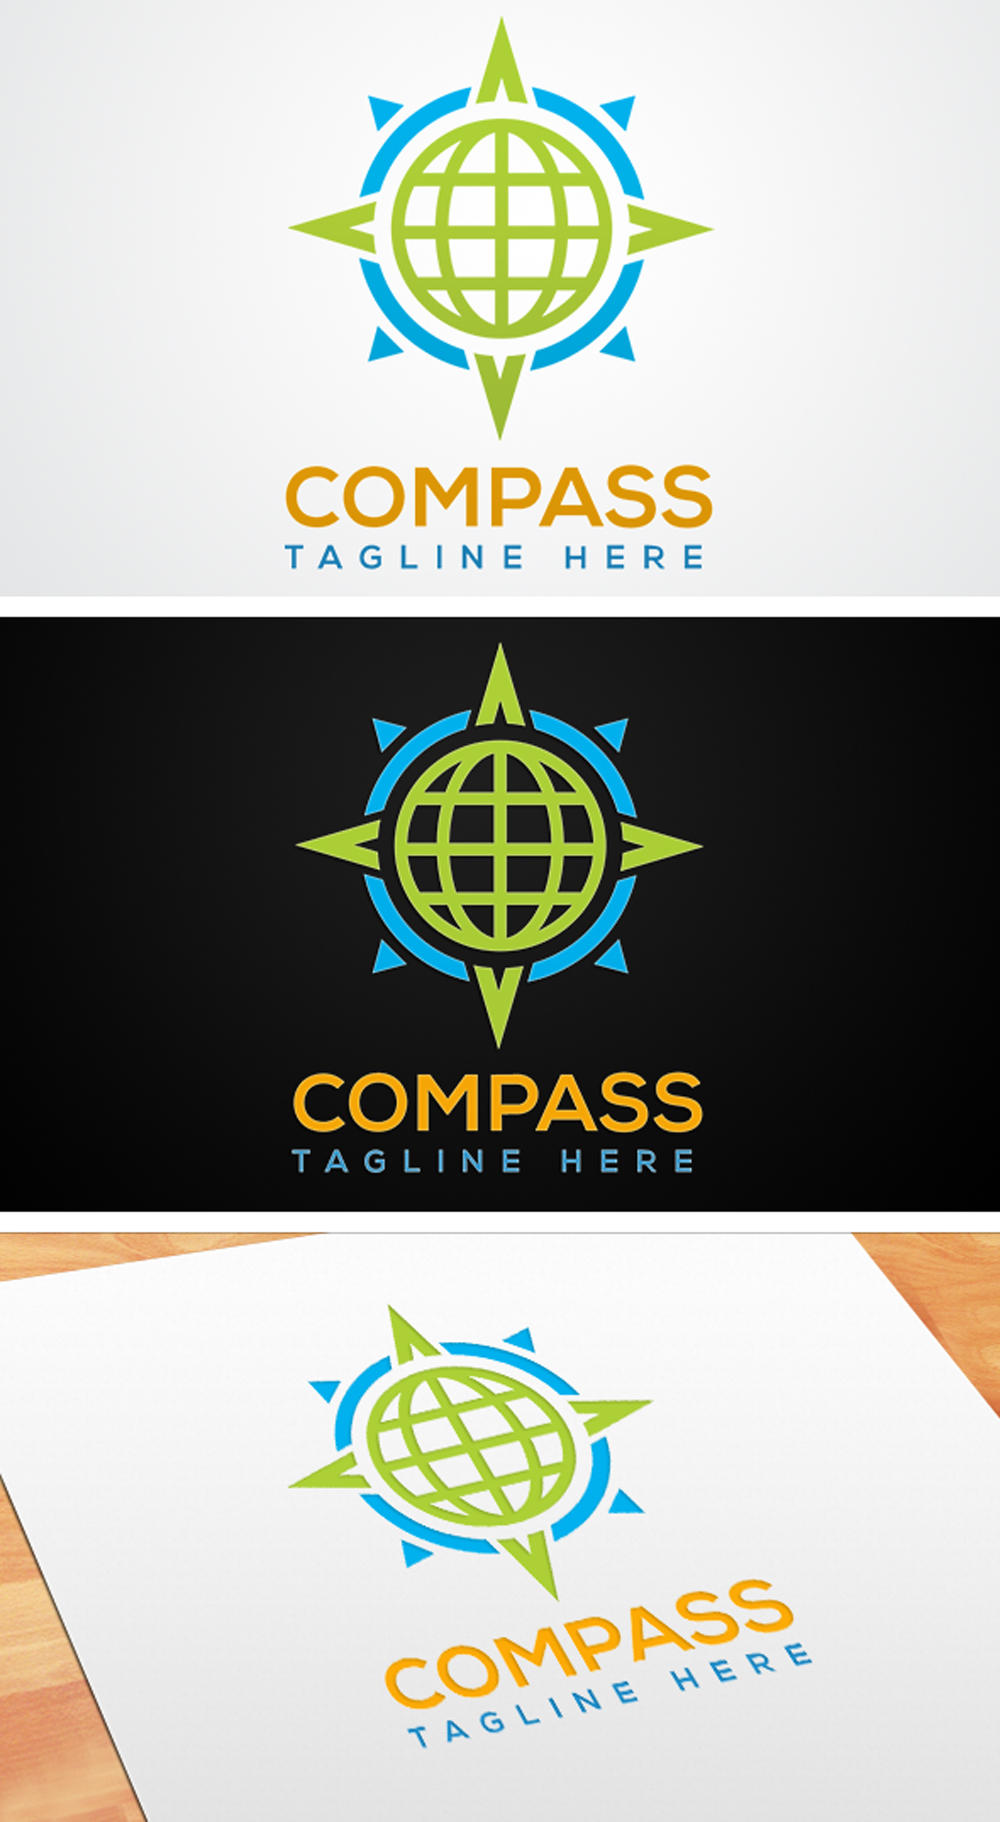 A selection of images of enchanting round logos in the form of a compass.